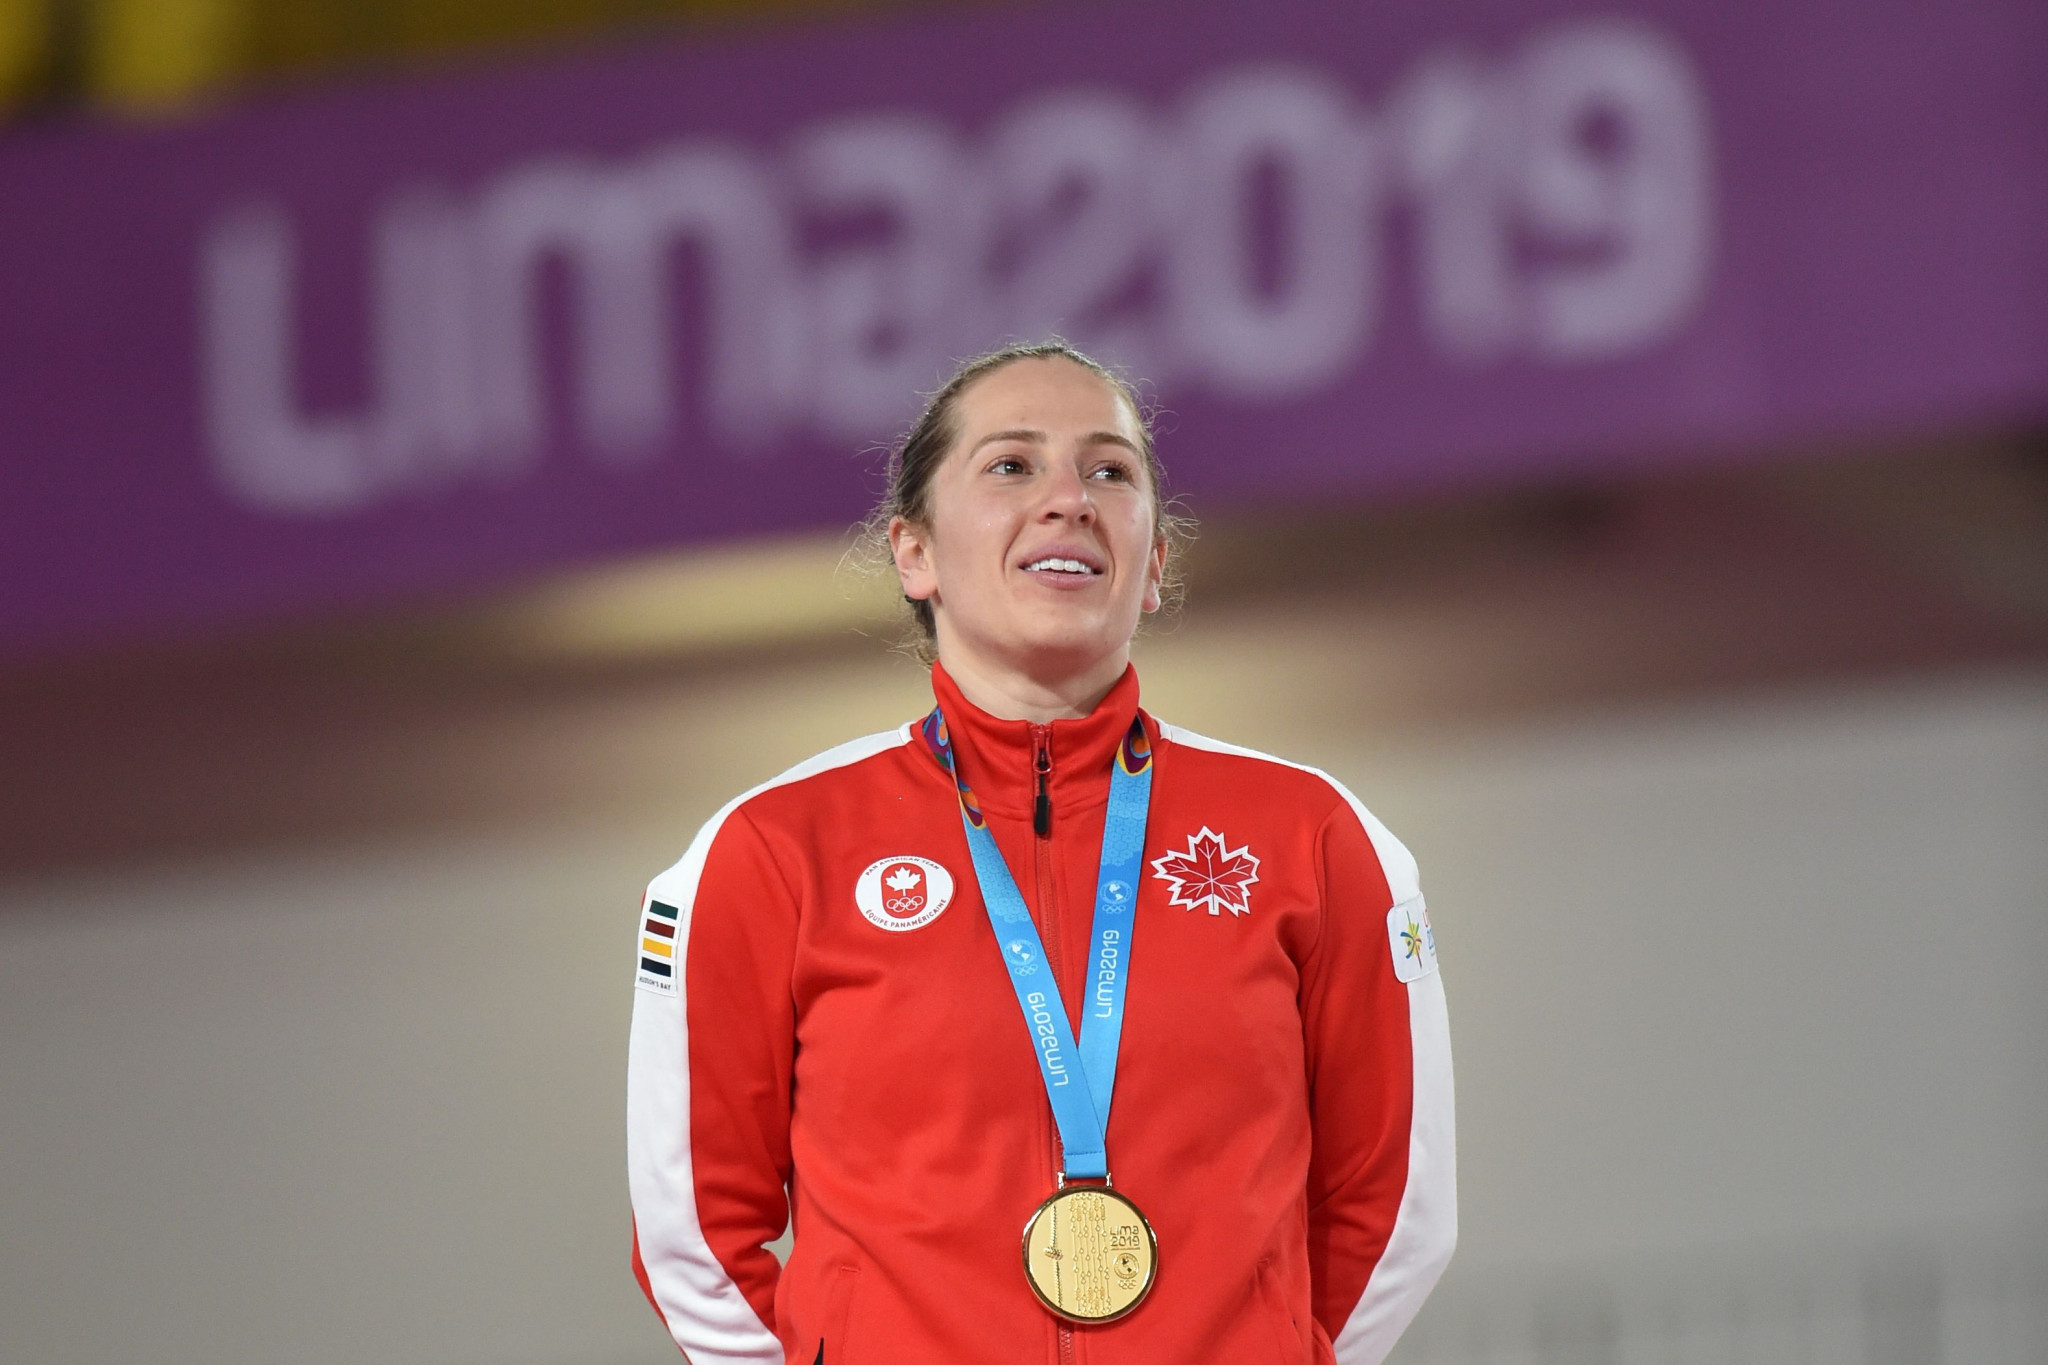 His compatriot Samantha Smith was the victor in the women's competition ©Lima 2019